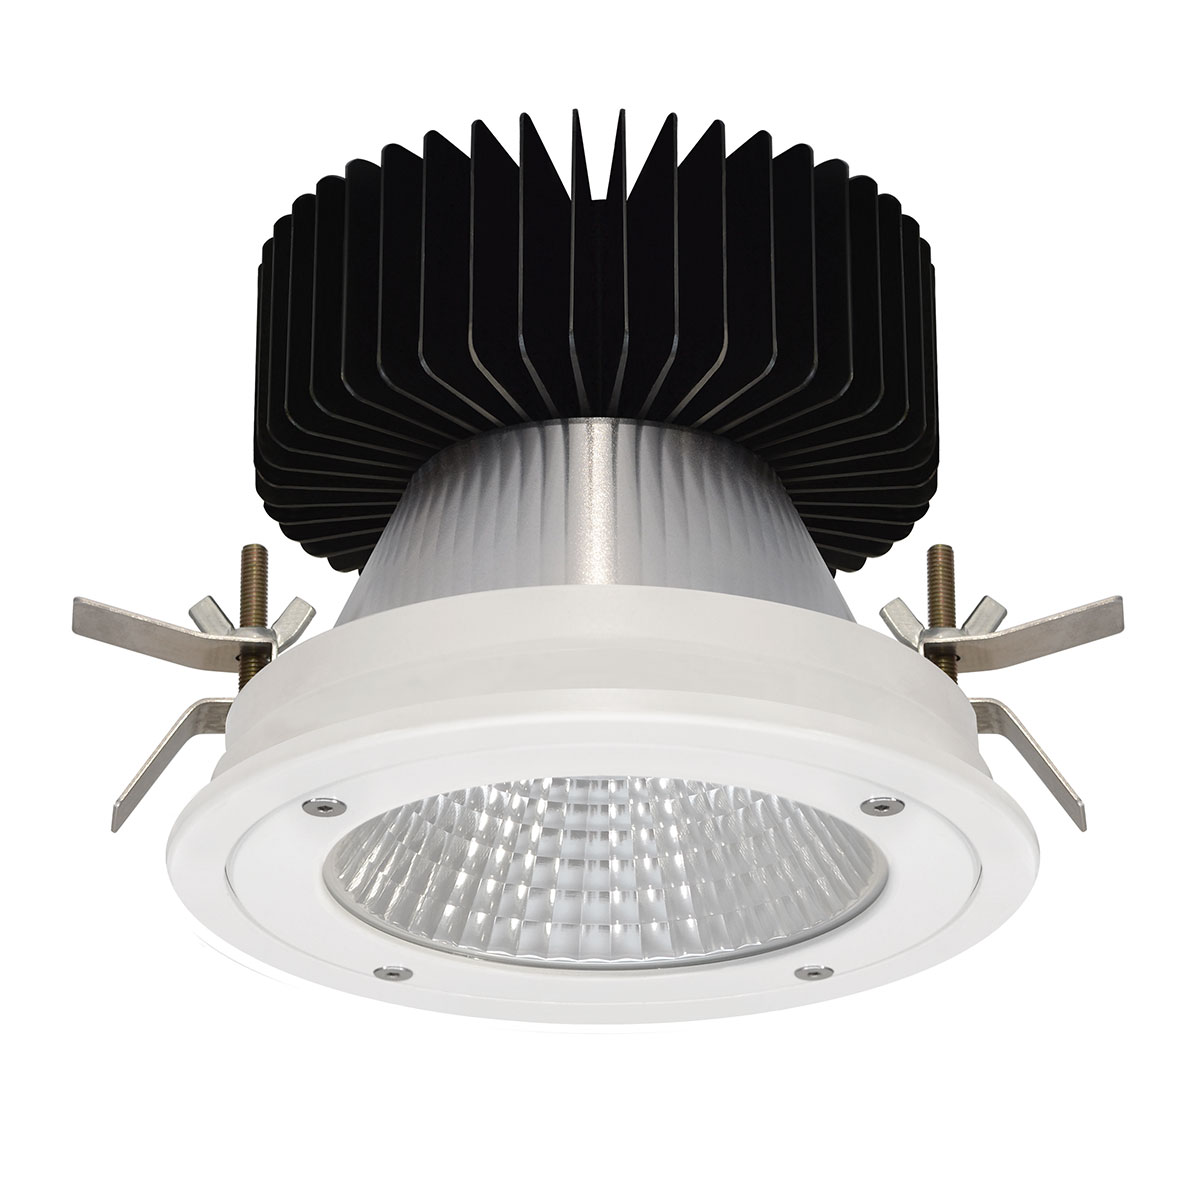 Kopa 16W Anti Tamper Fixed Round Recessed Downlight IP65 Rated 25° Degree Reflector Black